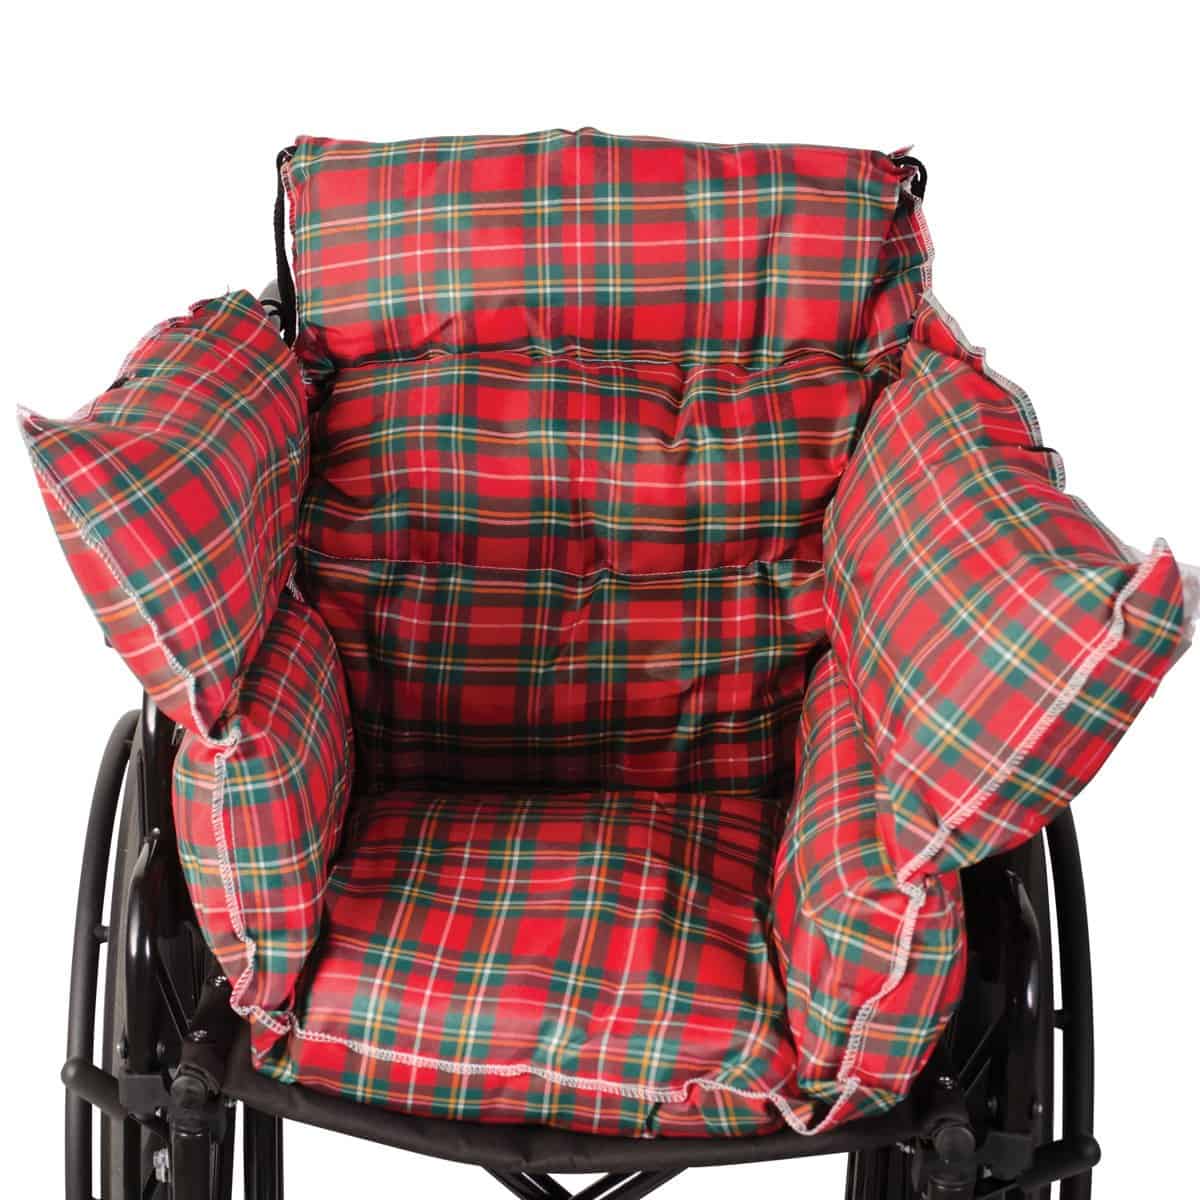 DMI Seat Cushion for Wheelchairs, Mobility Scooters, Office and 3 Inch